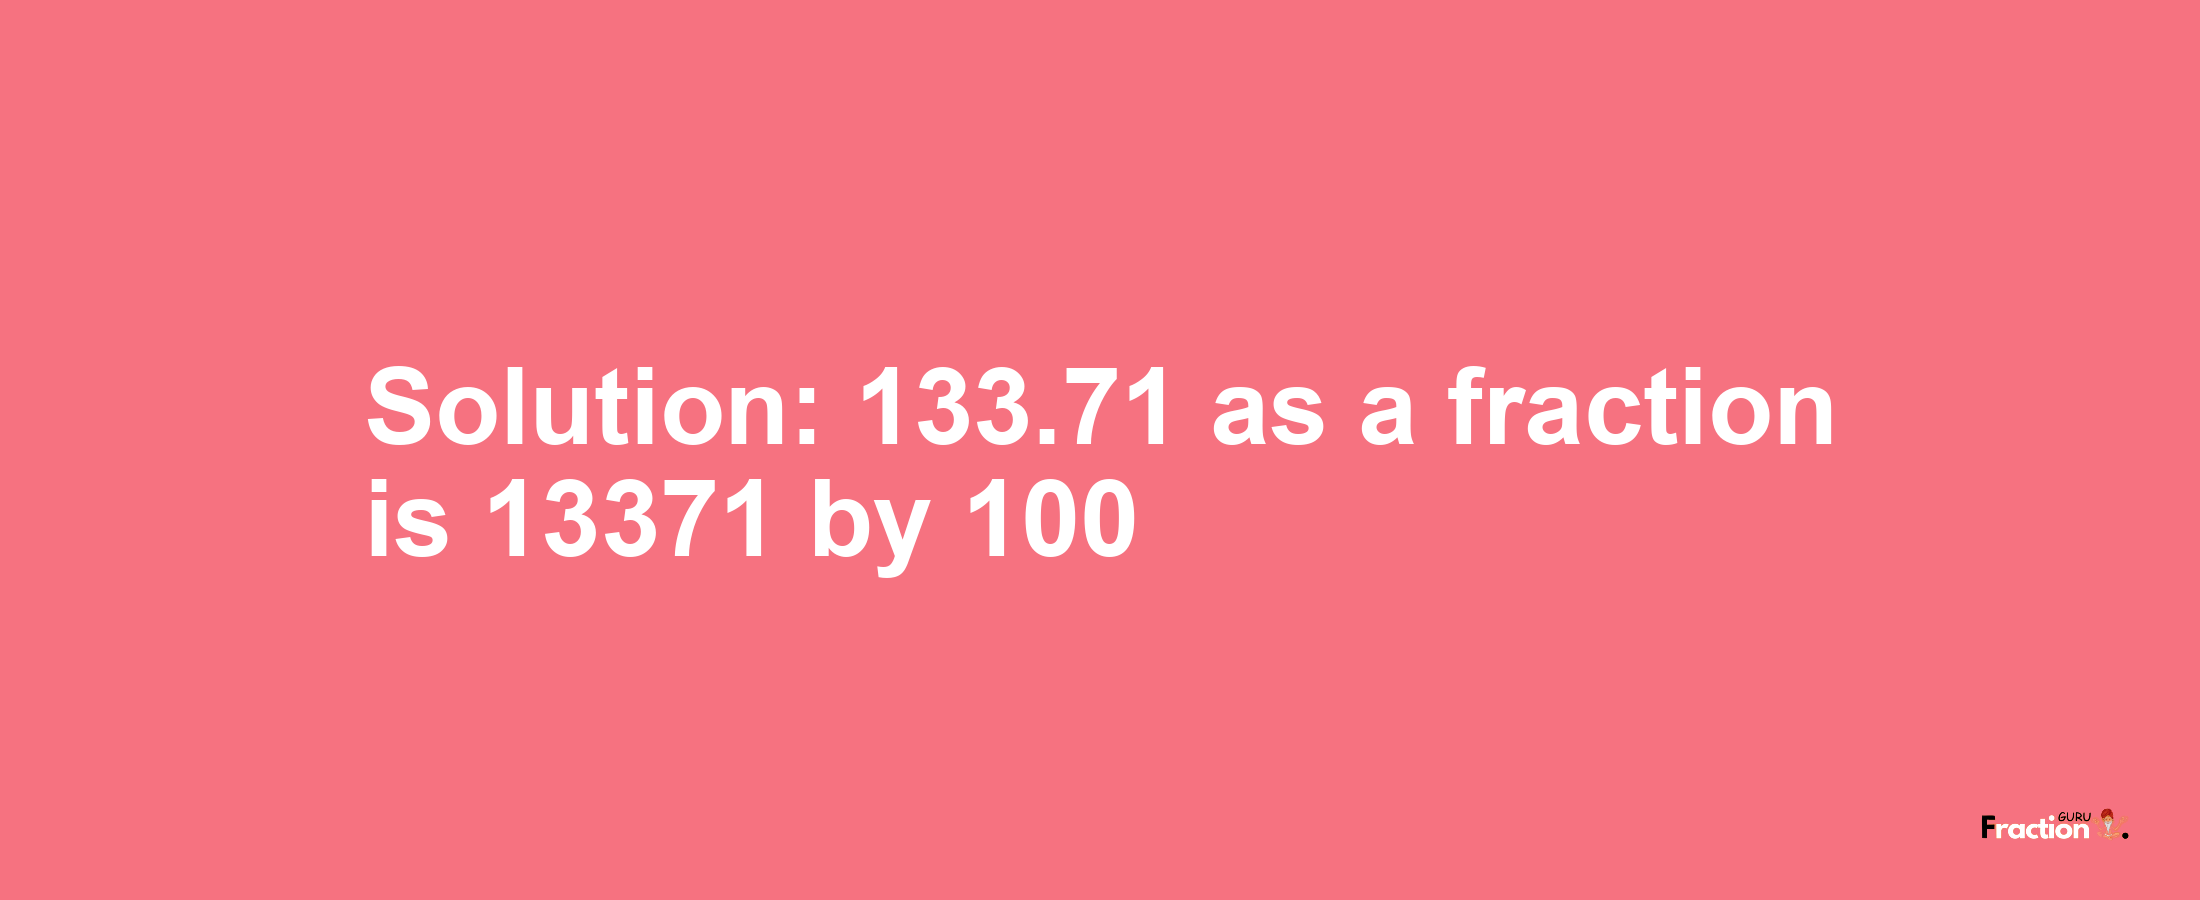 Solution:133.71 as a fraction is 13371/100